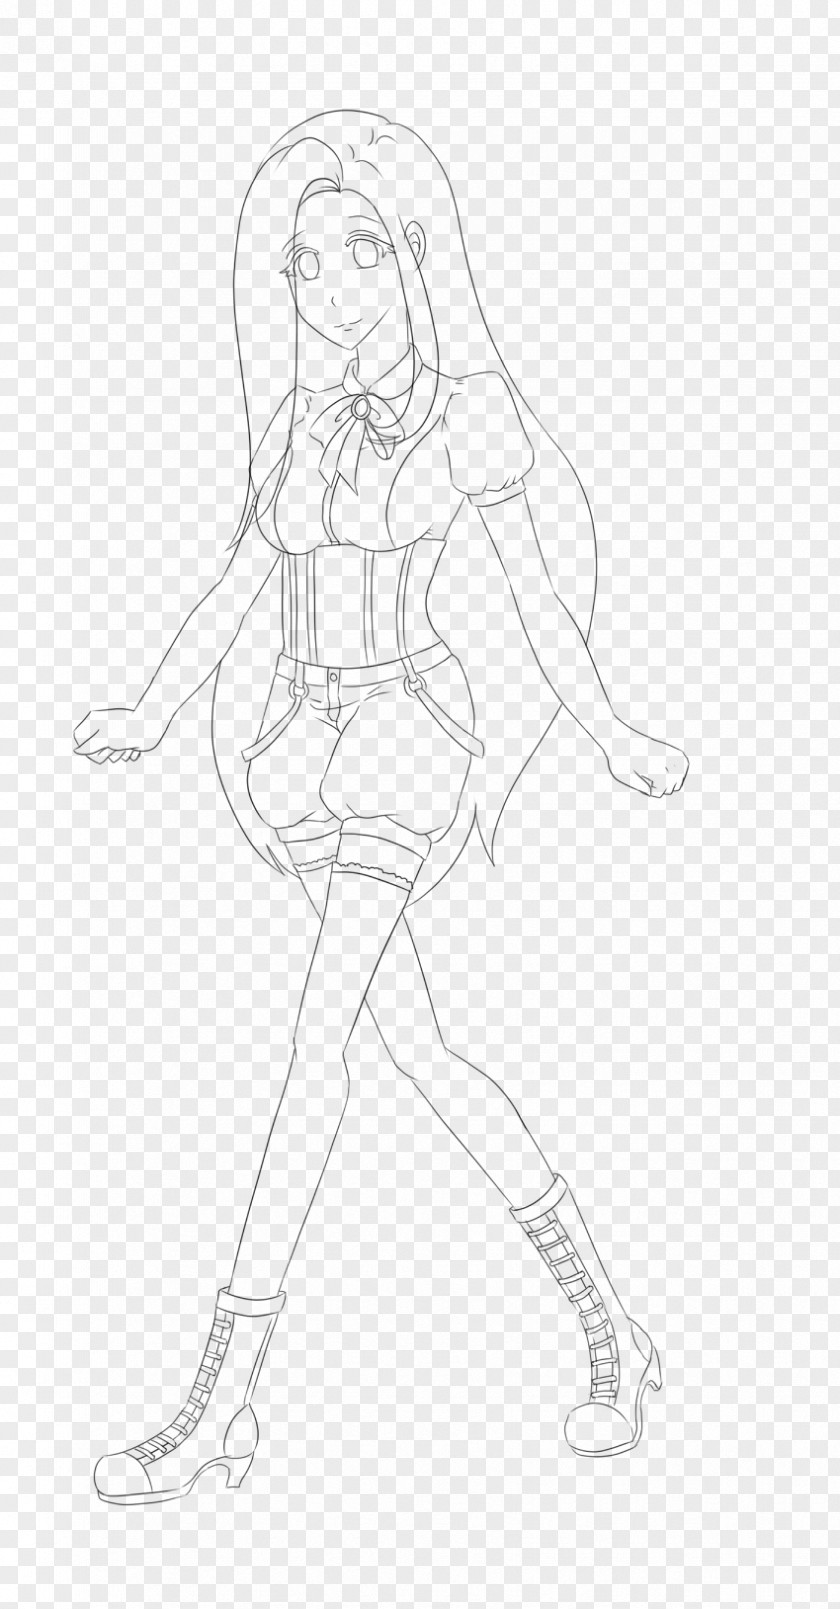 Gothic Style Drawing Line Art Cartoon Sketch PNG